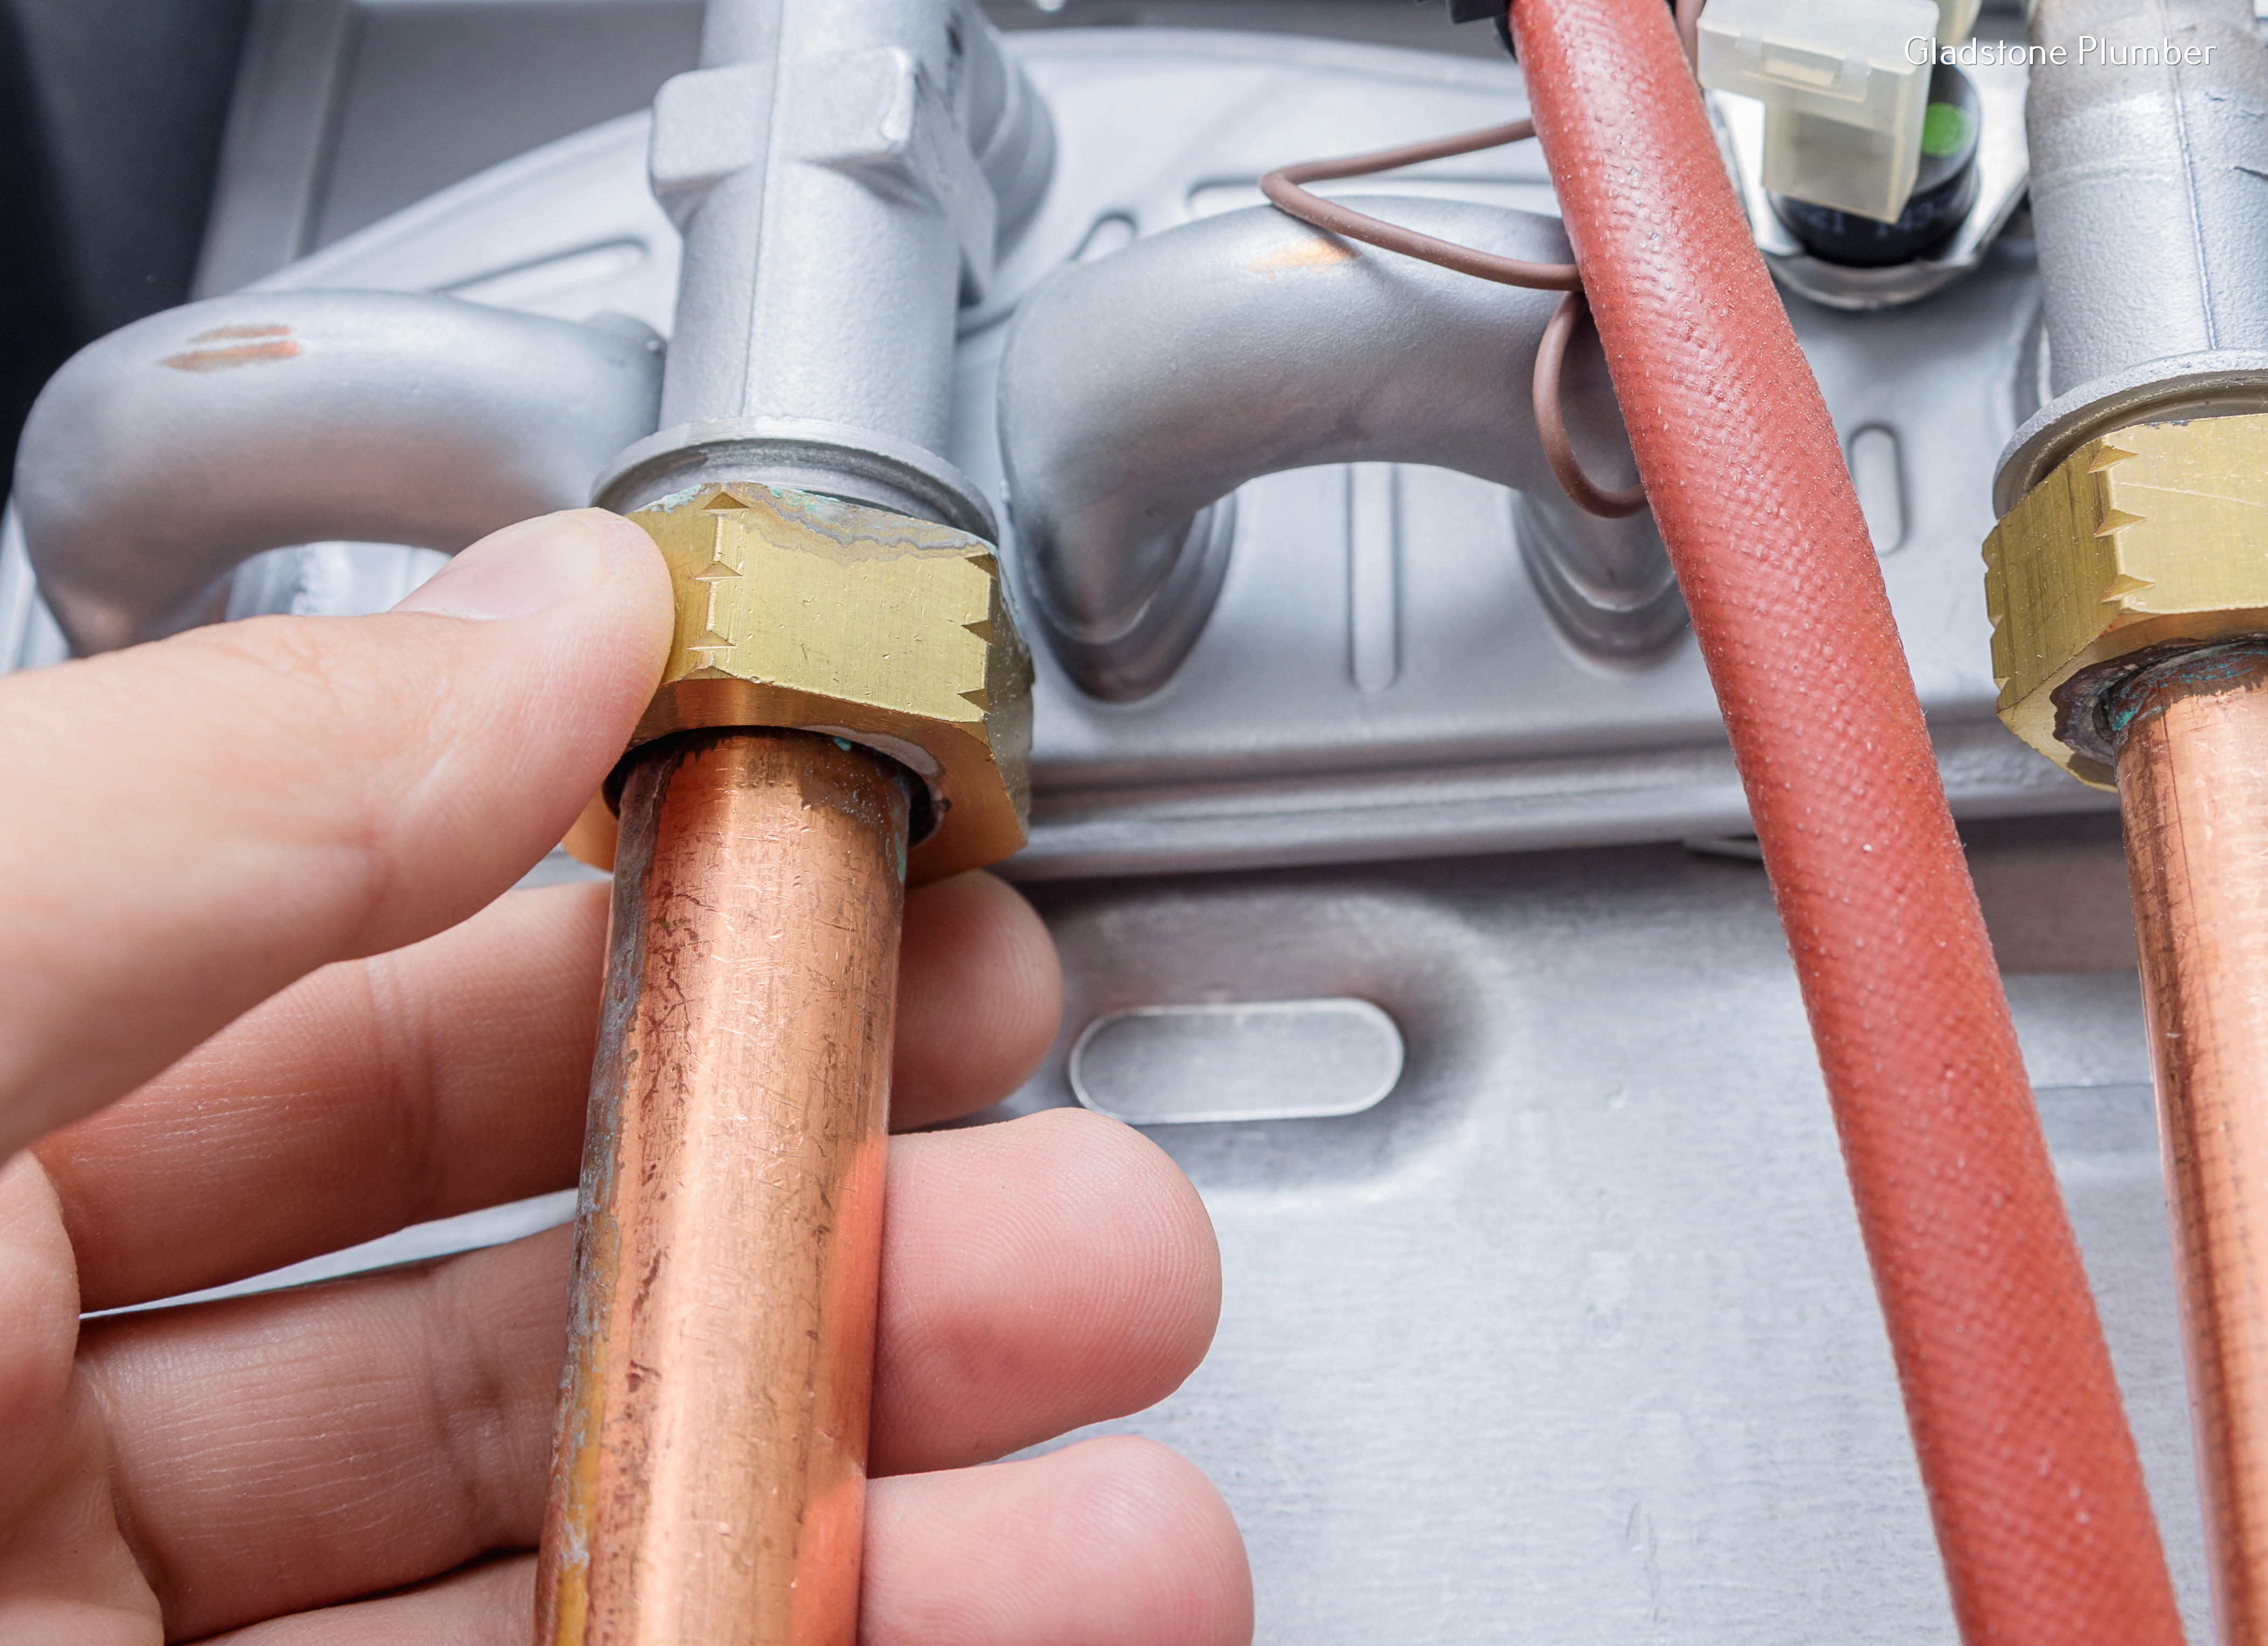 Sewer Surgeon, LLC Shares the Reasons to Hire a Professional Plumbing Installation Company